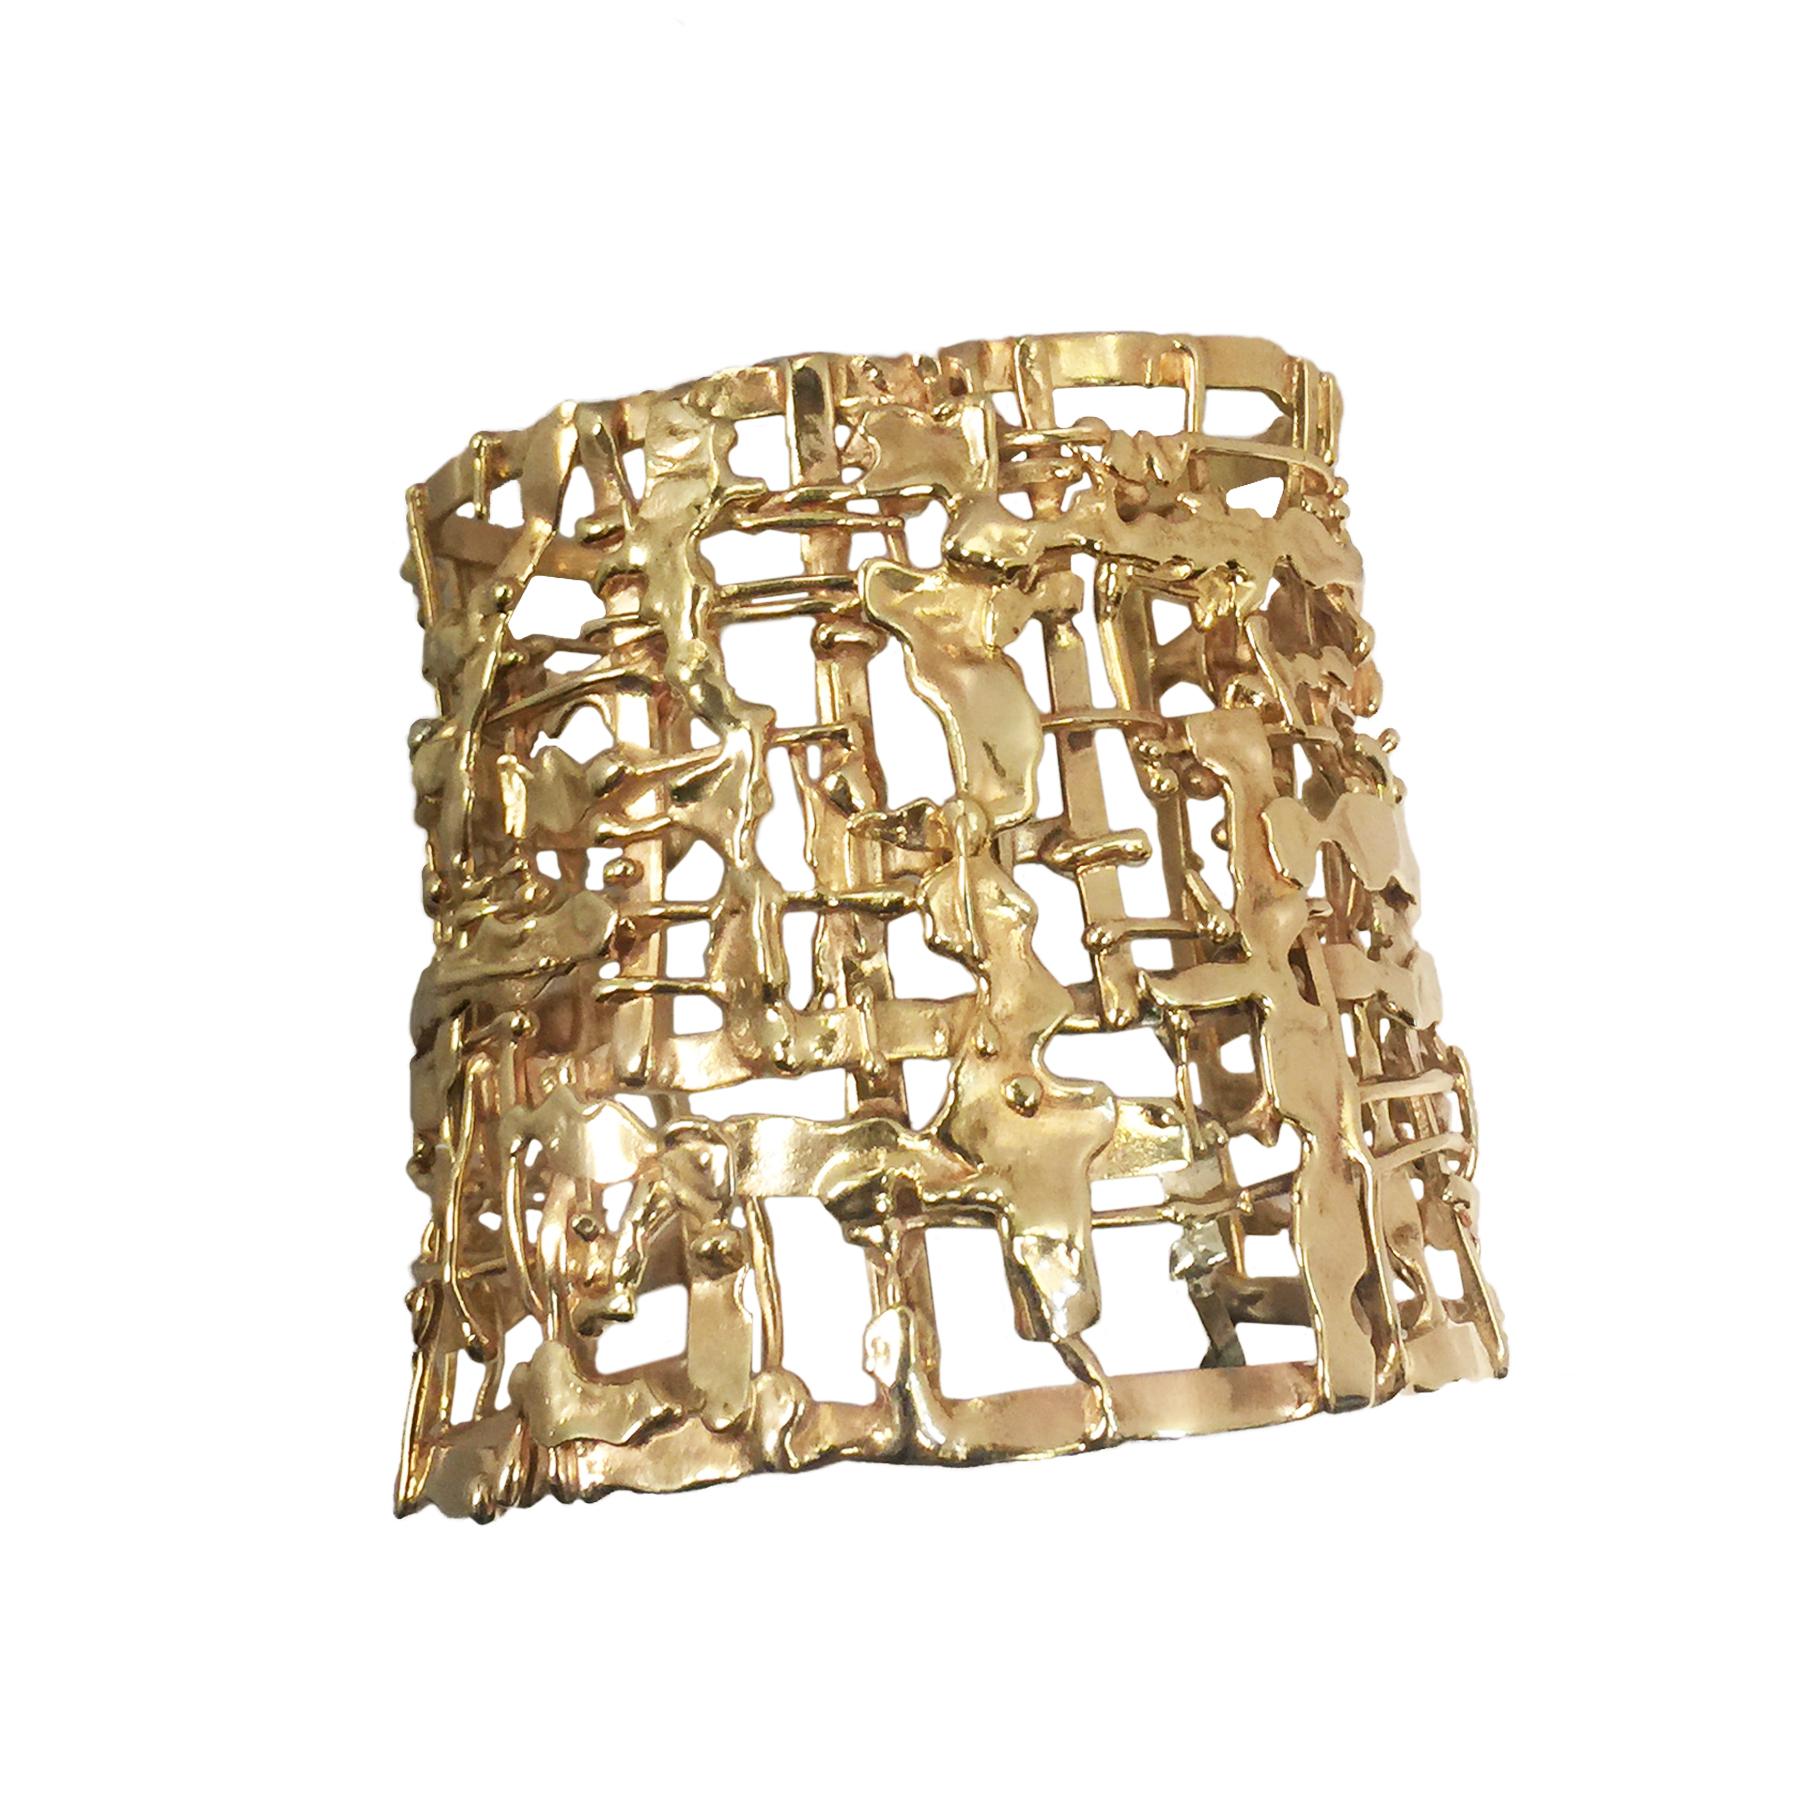 Circa 1960s Nina Lustig 14K Yellow Gold Mid Century modernist Cuff Bracelet, measuring 2 3/8 inches wide an opening of 1  3/8 inches an inside measurement of 7 inches and can be squeezed to be a bit smaller. All hand made with a slight tapering to